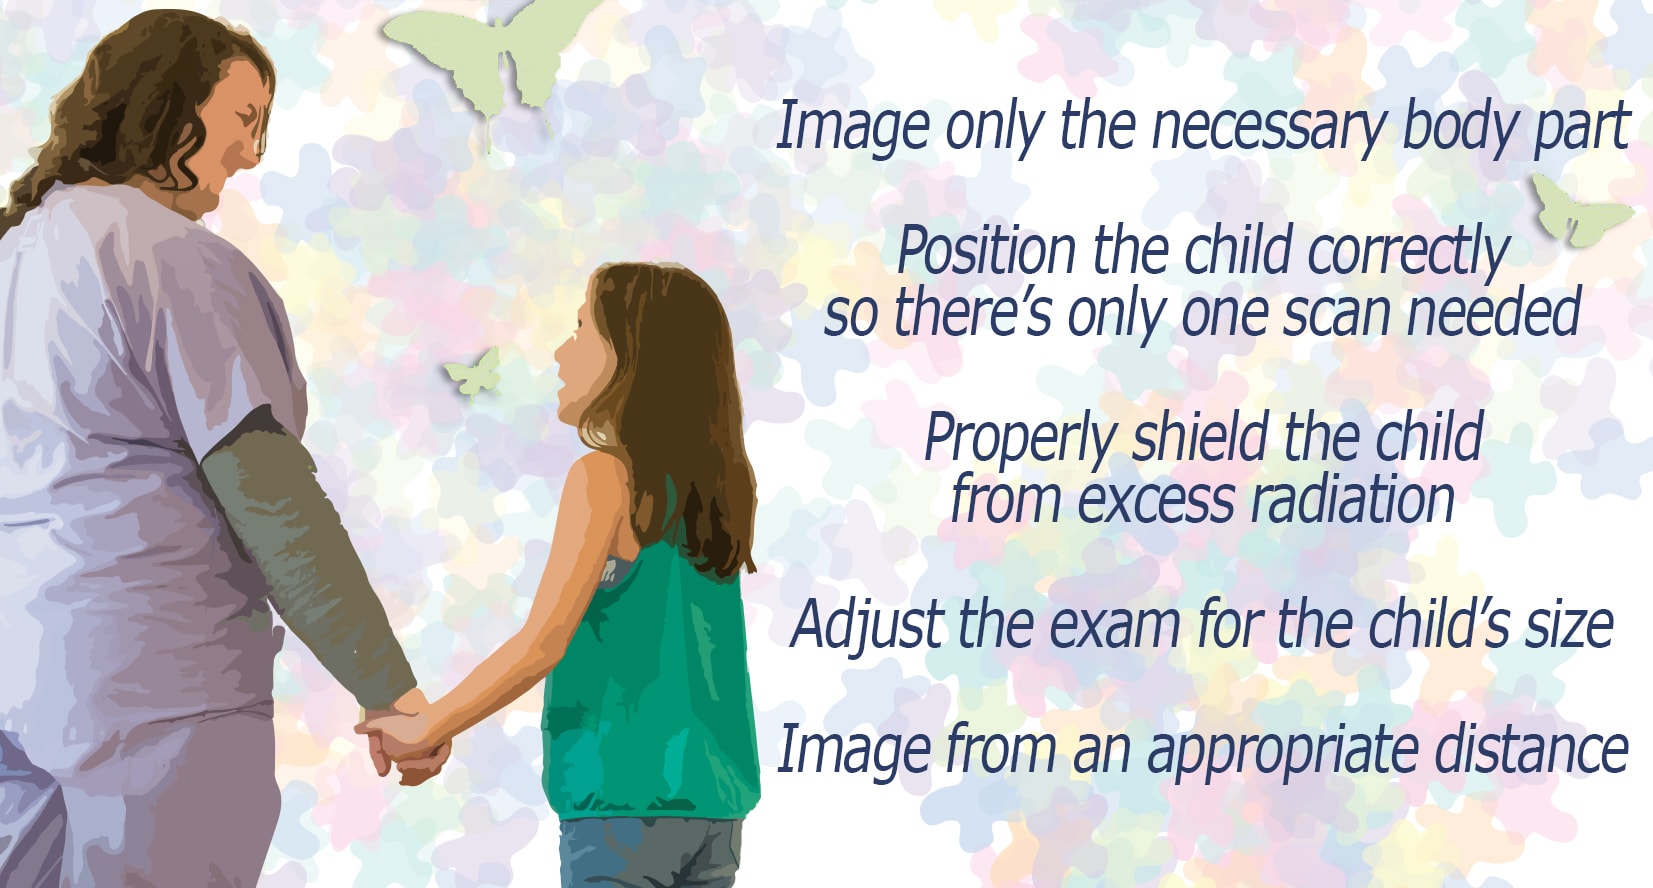 A graphic that has a list of tips for how to position children gently